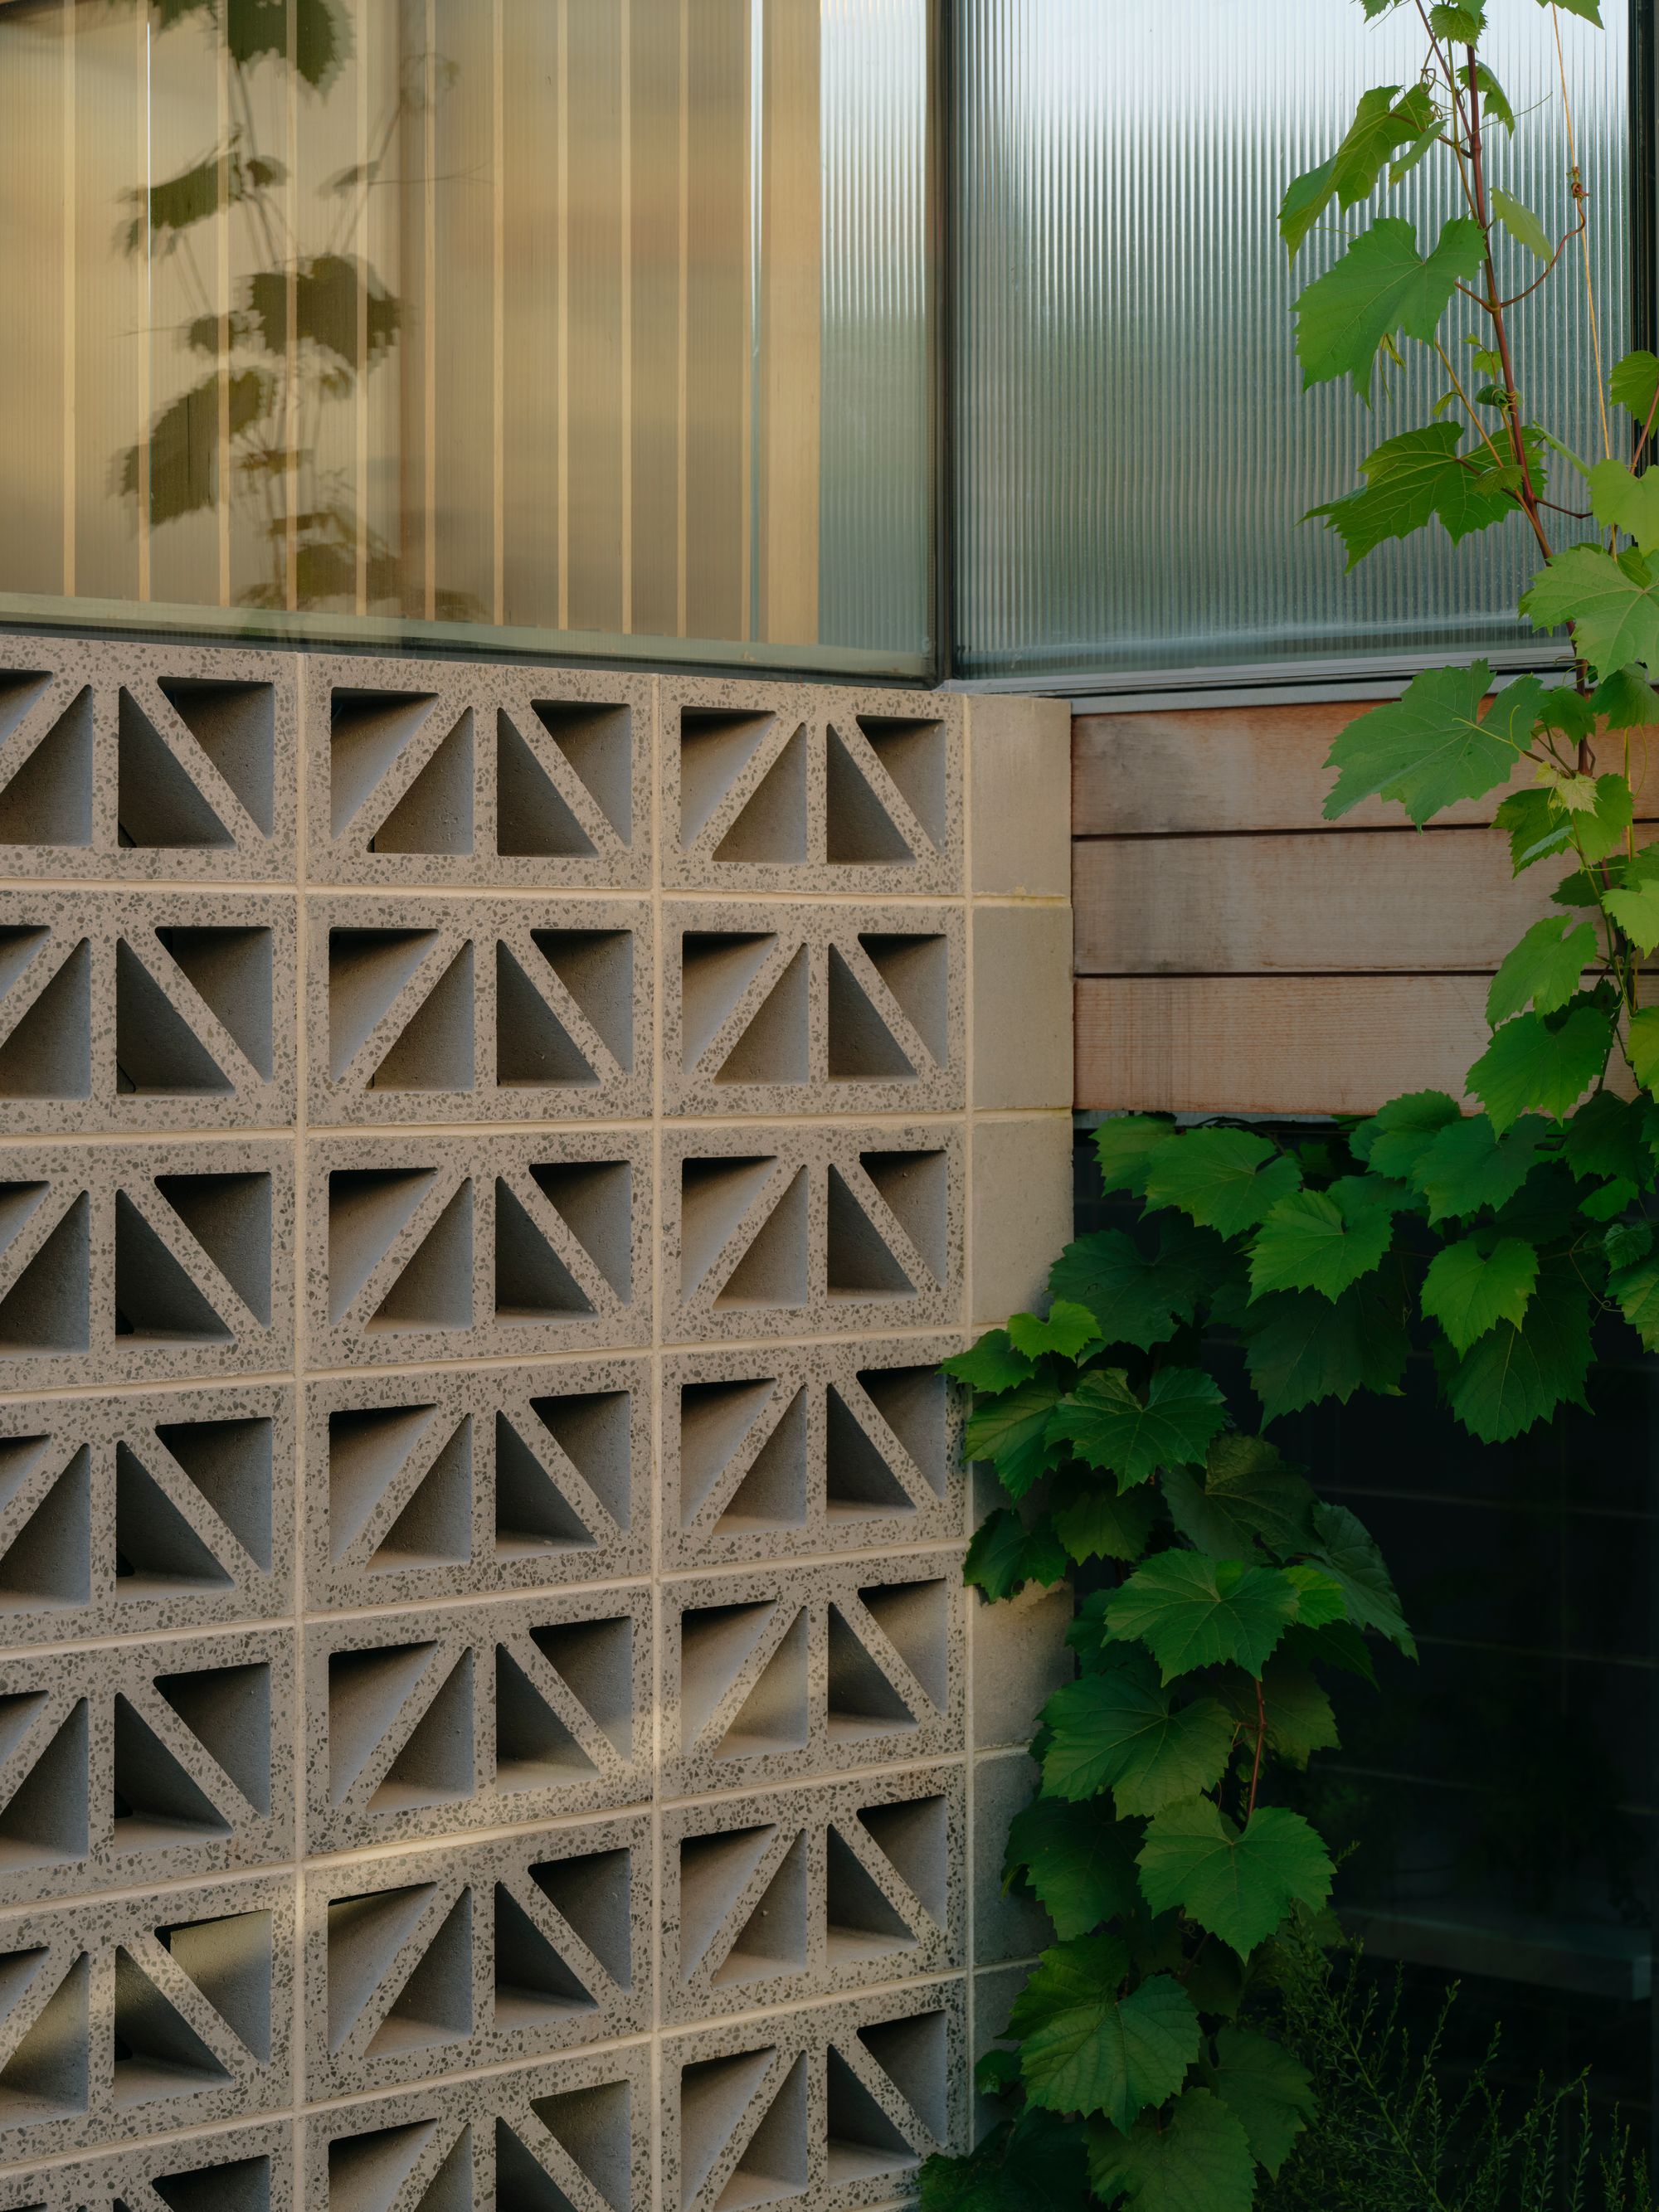 Sunday by Architecture architecture. Detailed view of breeze blocks and courtyard.